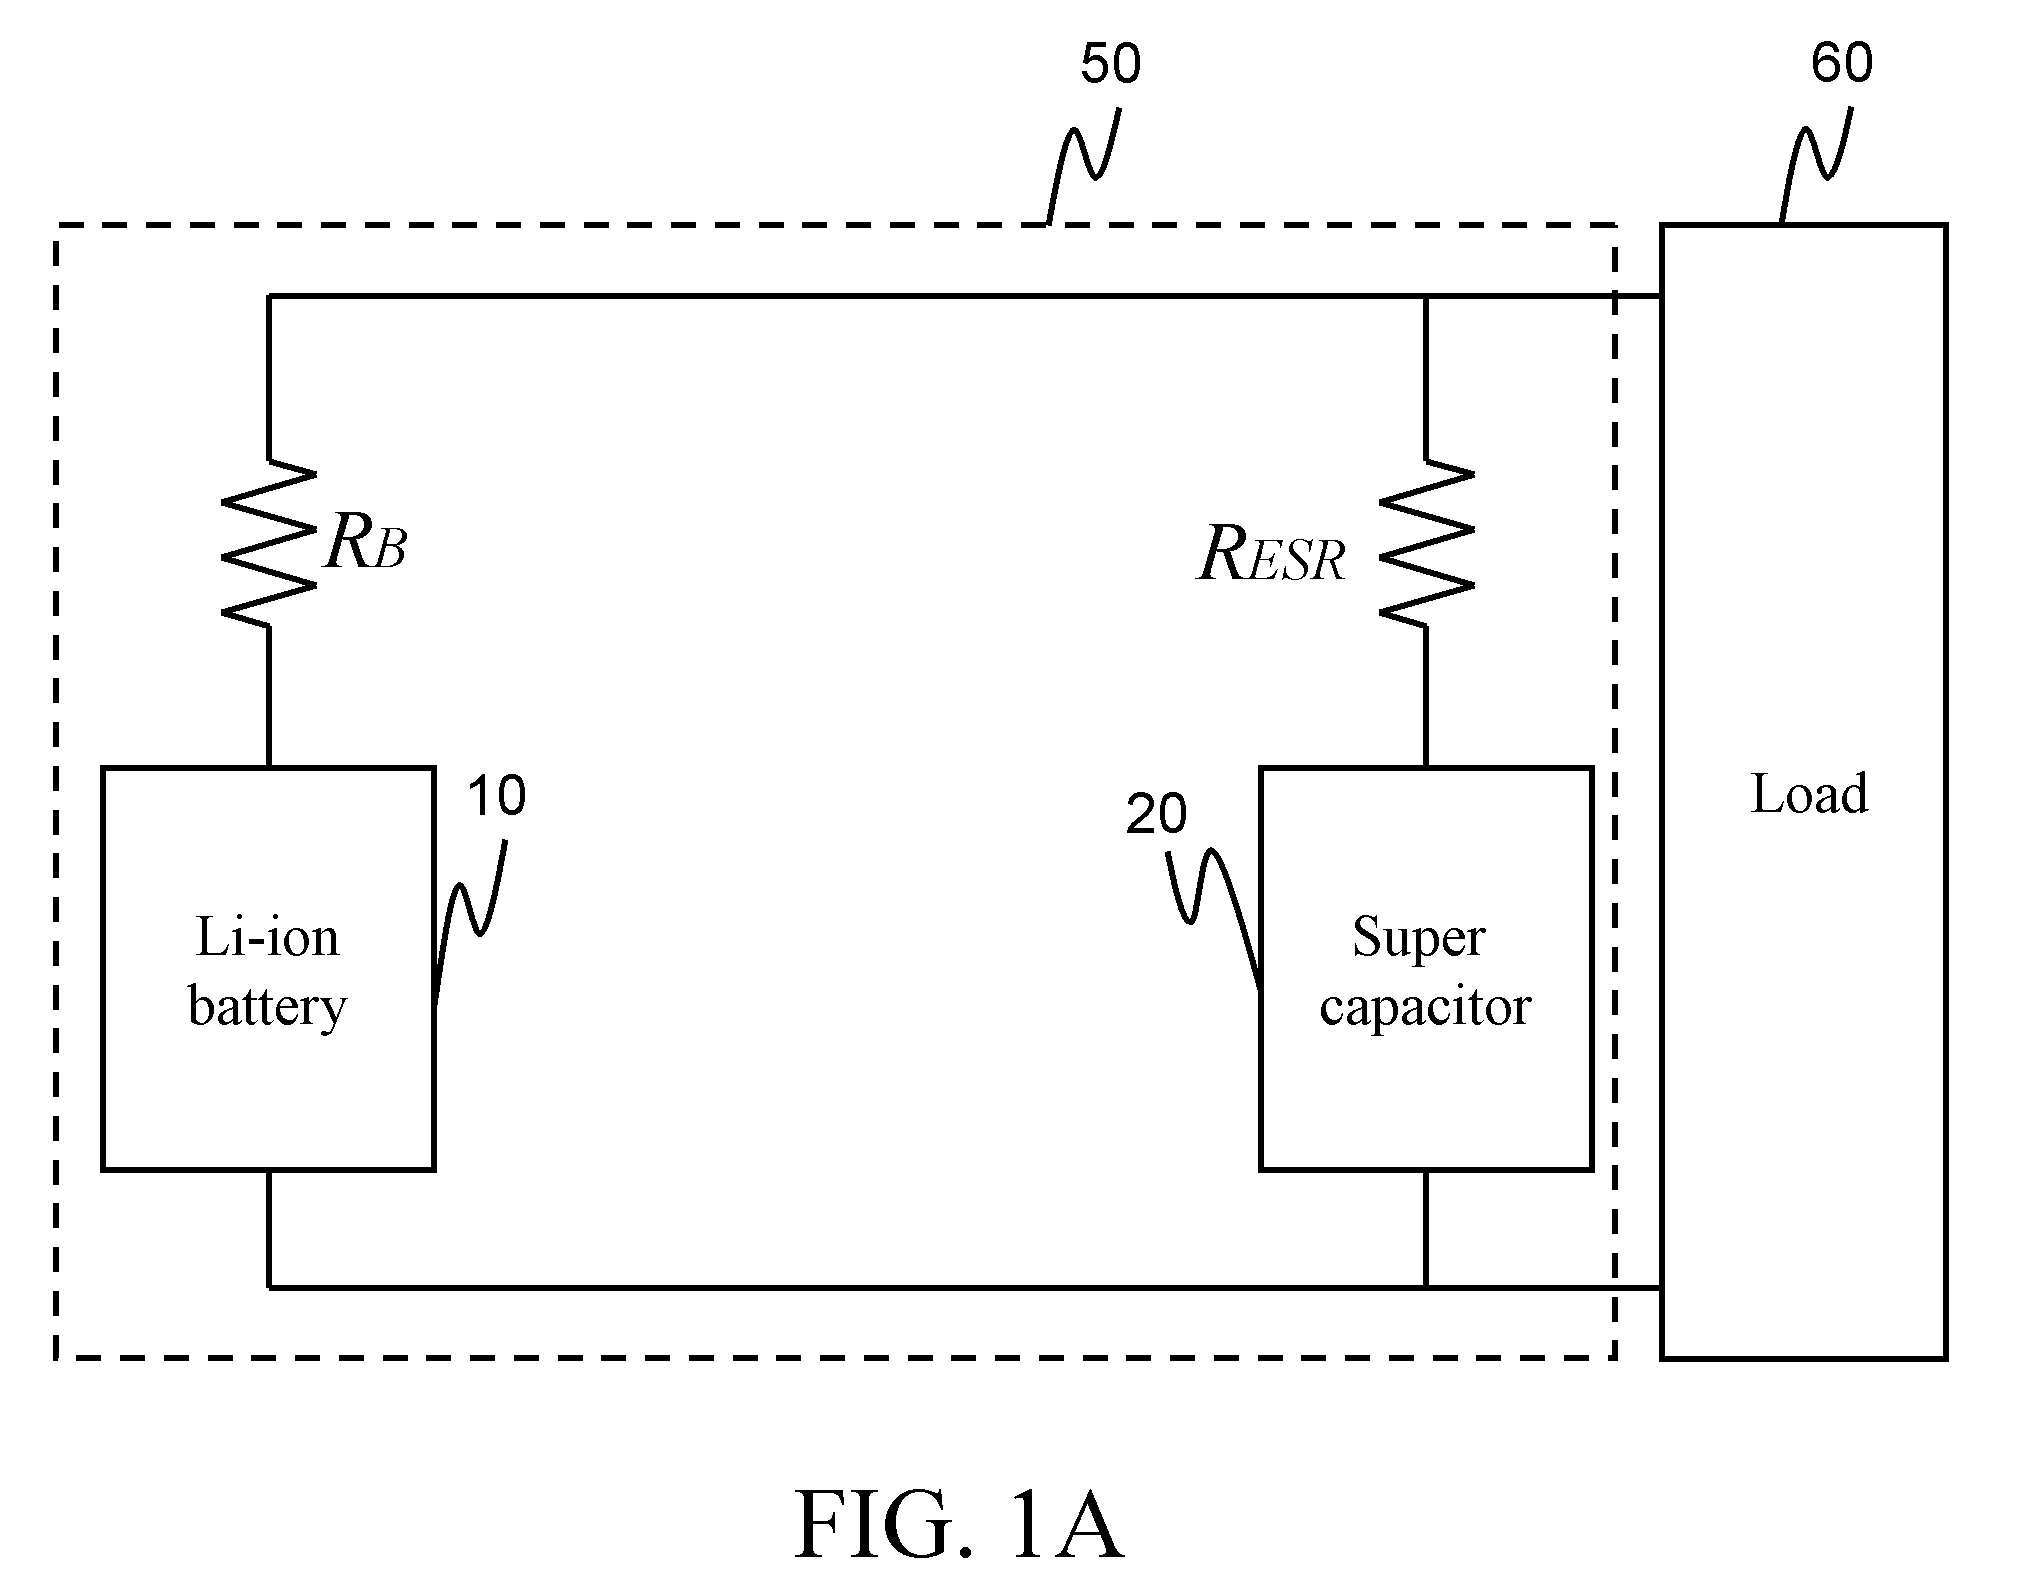 Fault-tolerant battery set and start-up battery module